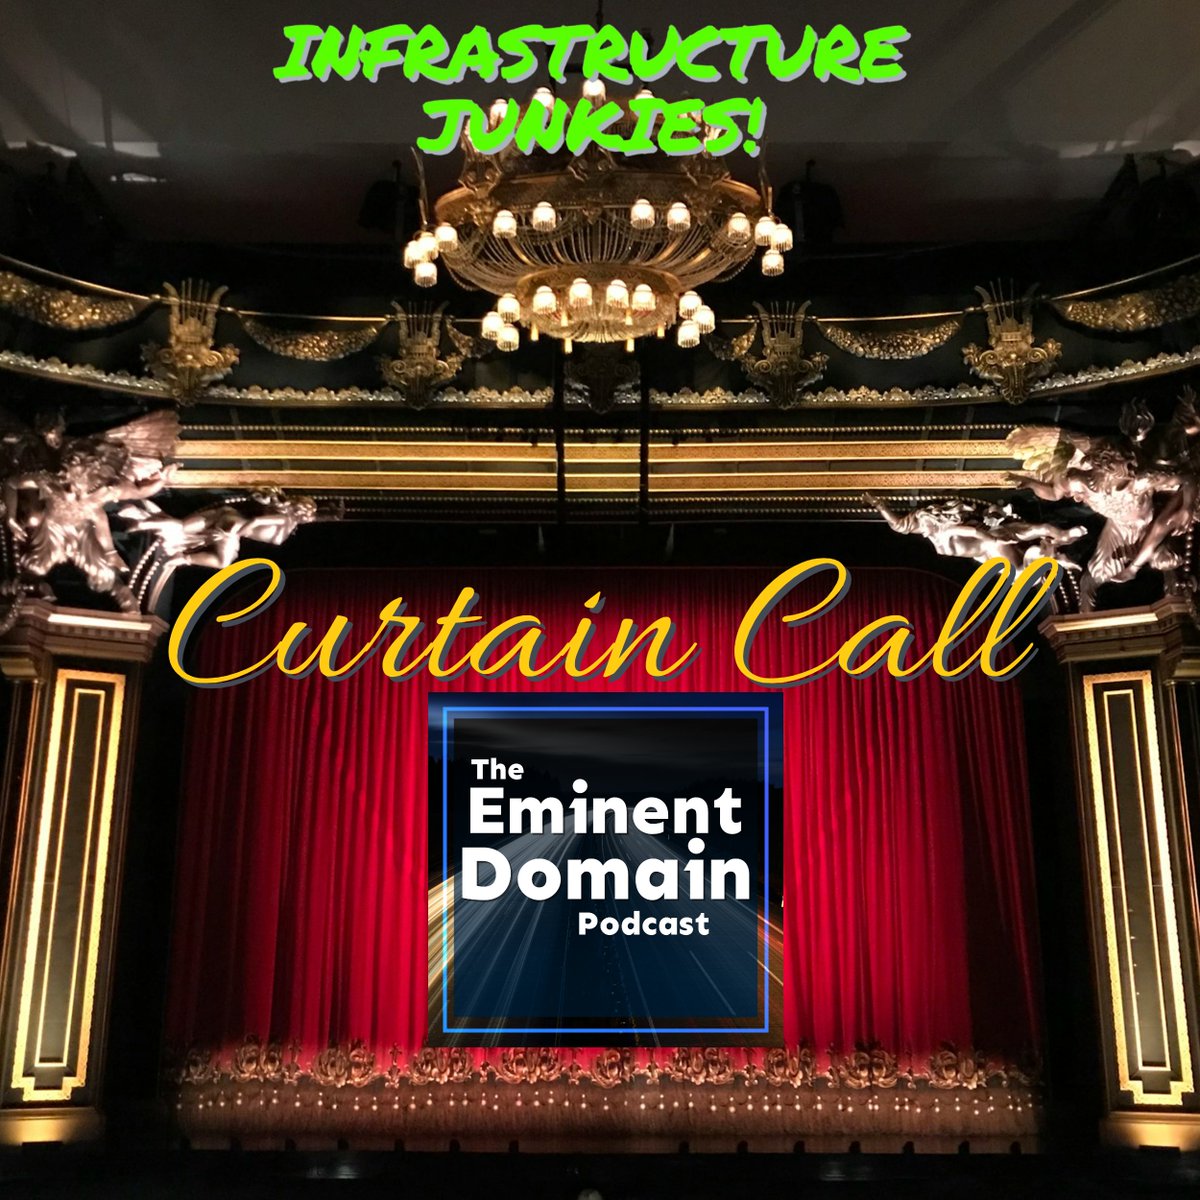 The Eminent Domain Podcast's host, Texas attorney @J_Clint, joins the #InfrastructureJunkies to reflect upon his show, his experiences, & all that he learned from being the pioneer podcast for the eminent domain industry.  Listen here: podcasts.apple.com/us/podcast/cur…